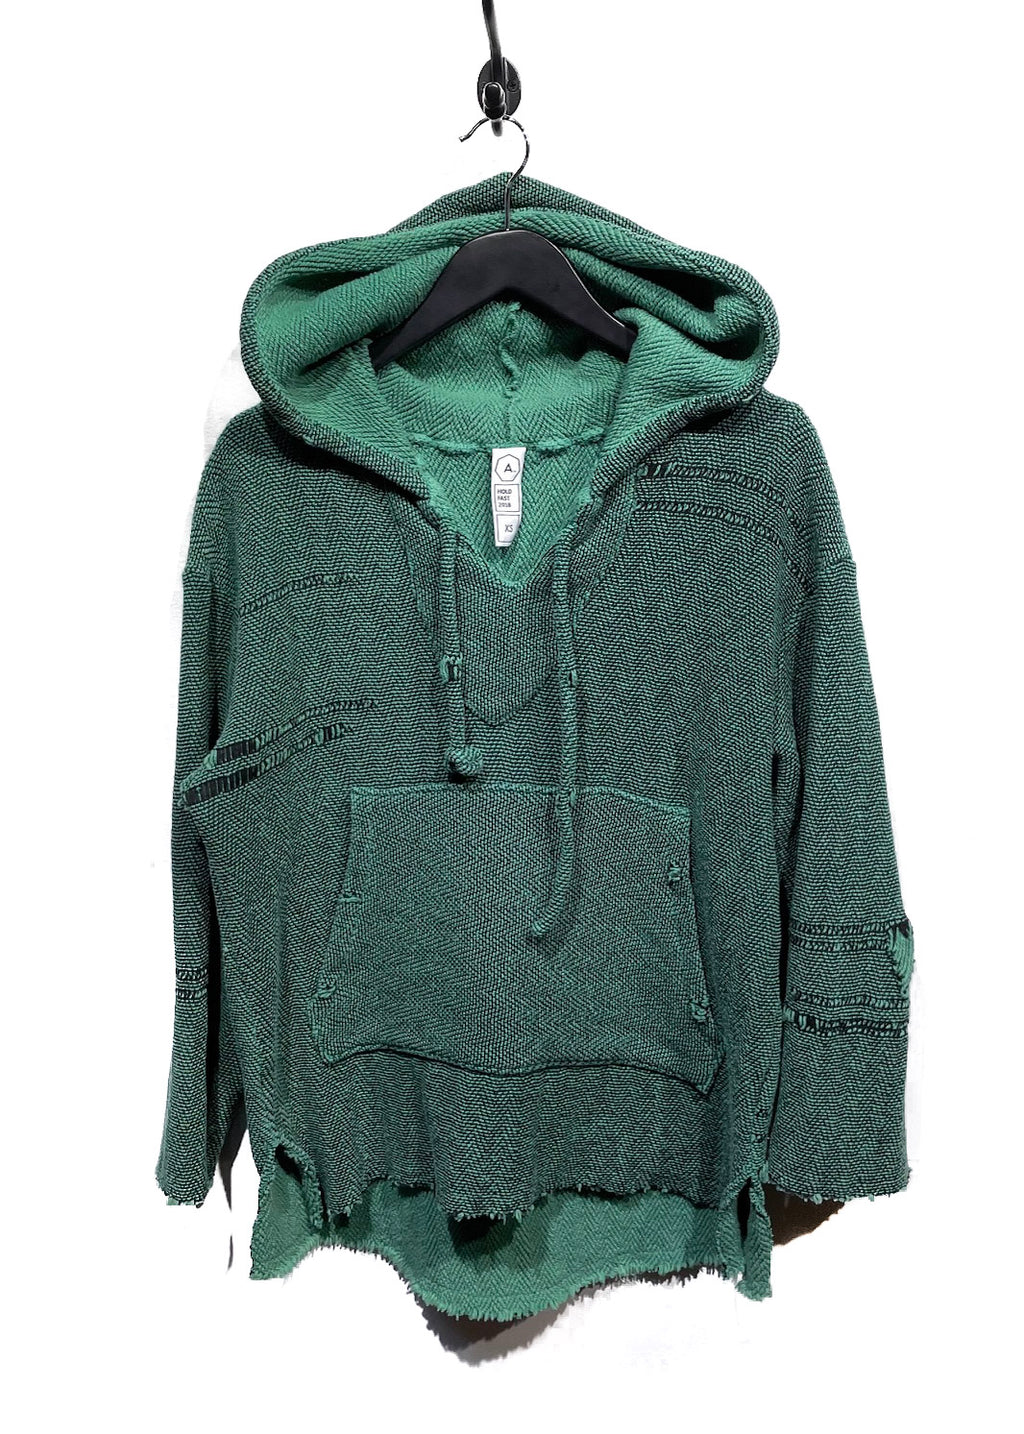 Alchemist Hold Fast 2018 Green Cotton Poncho Hoodie with Rose Print Panel at Back